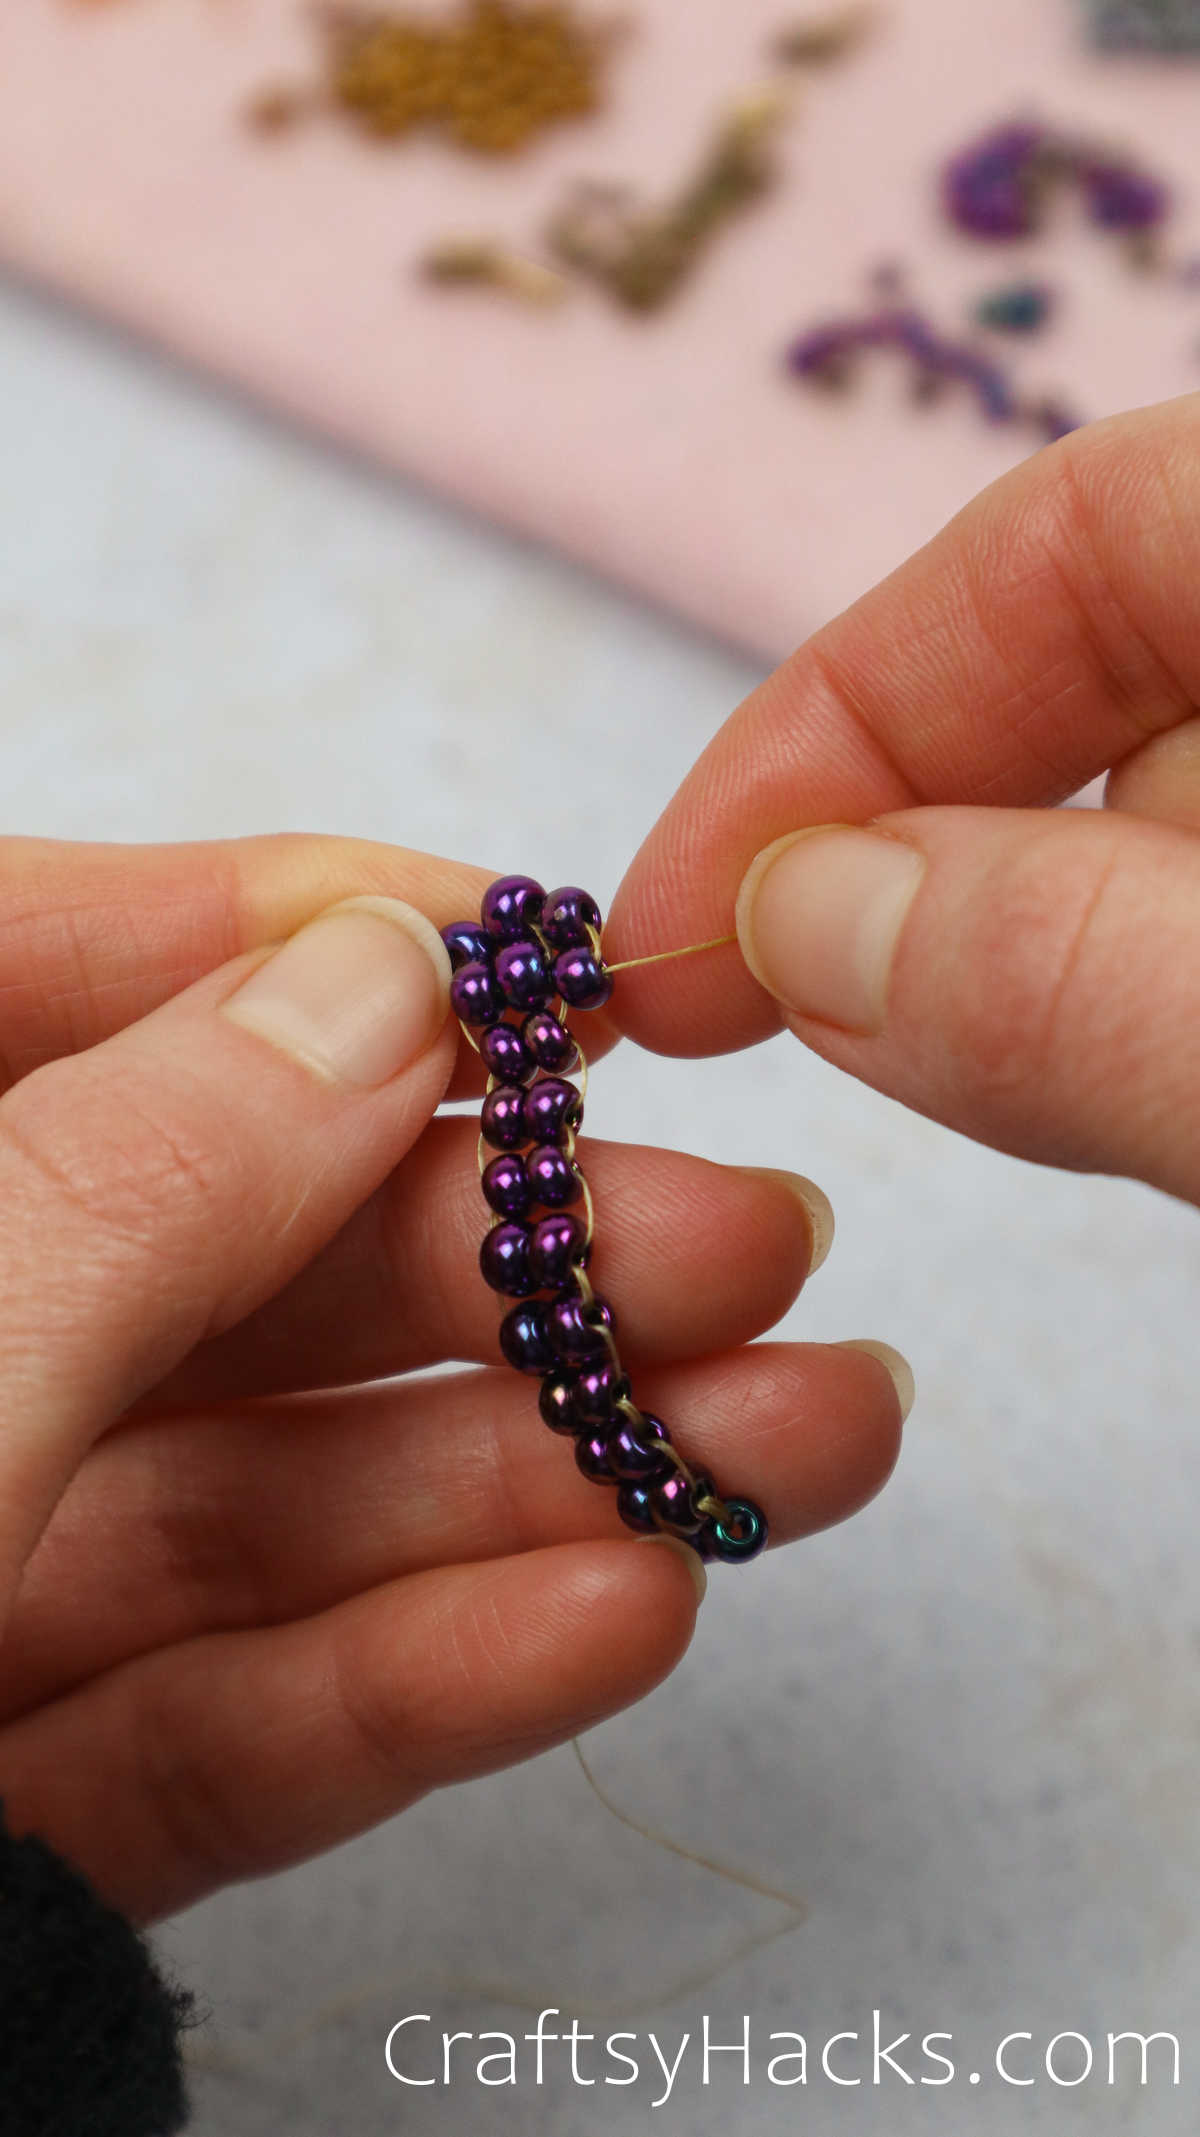 weaving beads together